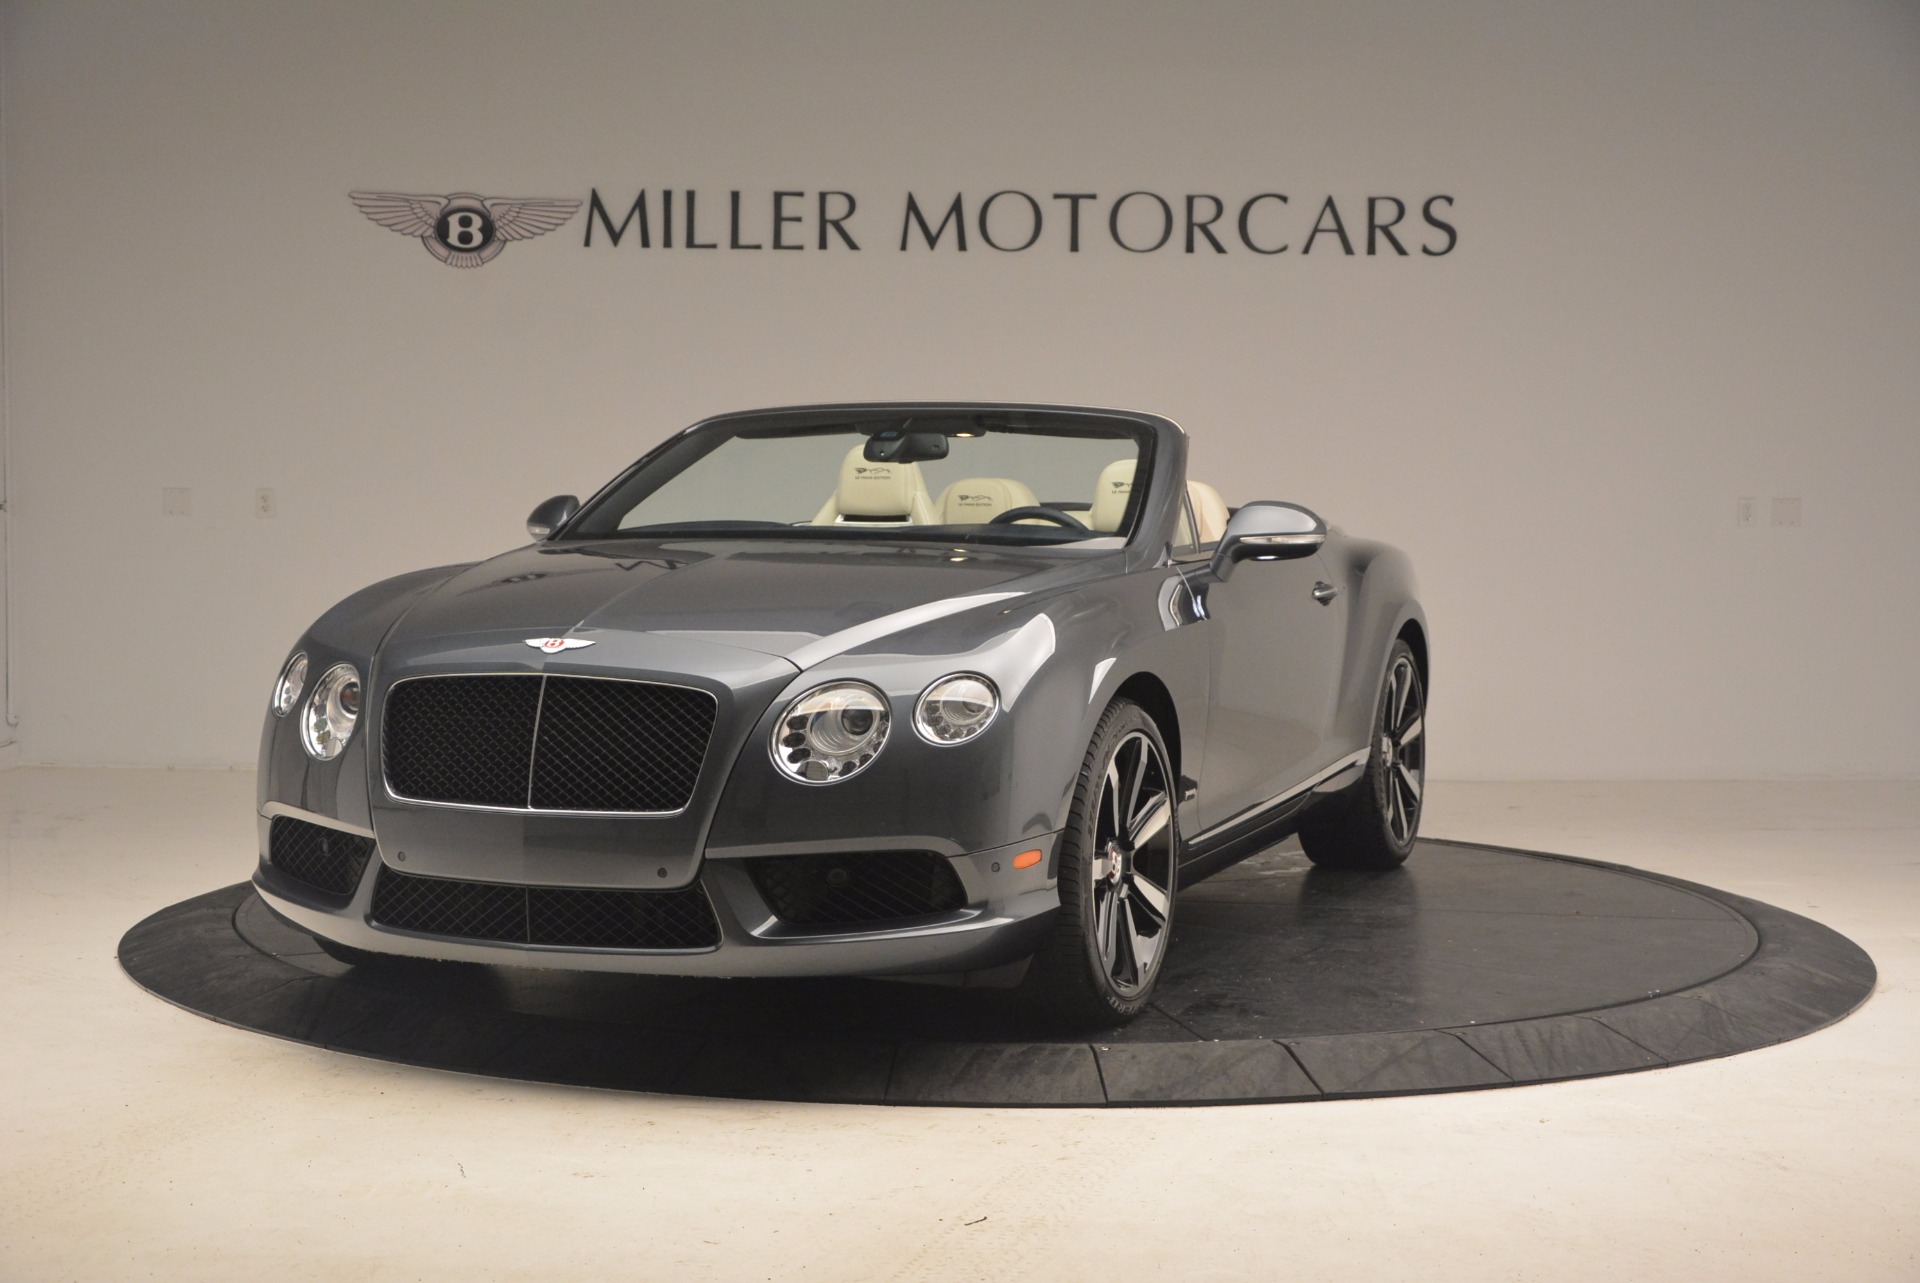 Used 2013 Bentley Continental GT V8 Le Mans Edition, 1 of 48 for sale Sold at Bentley Greenwich in Greenwich CT 06830 1